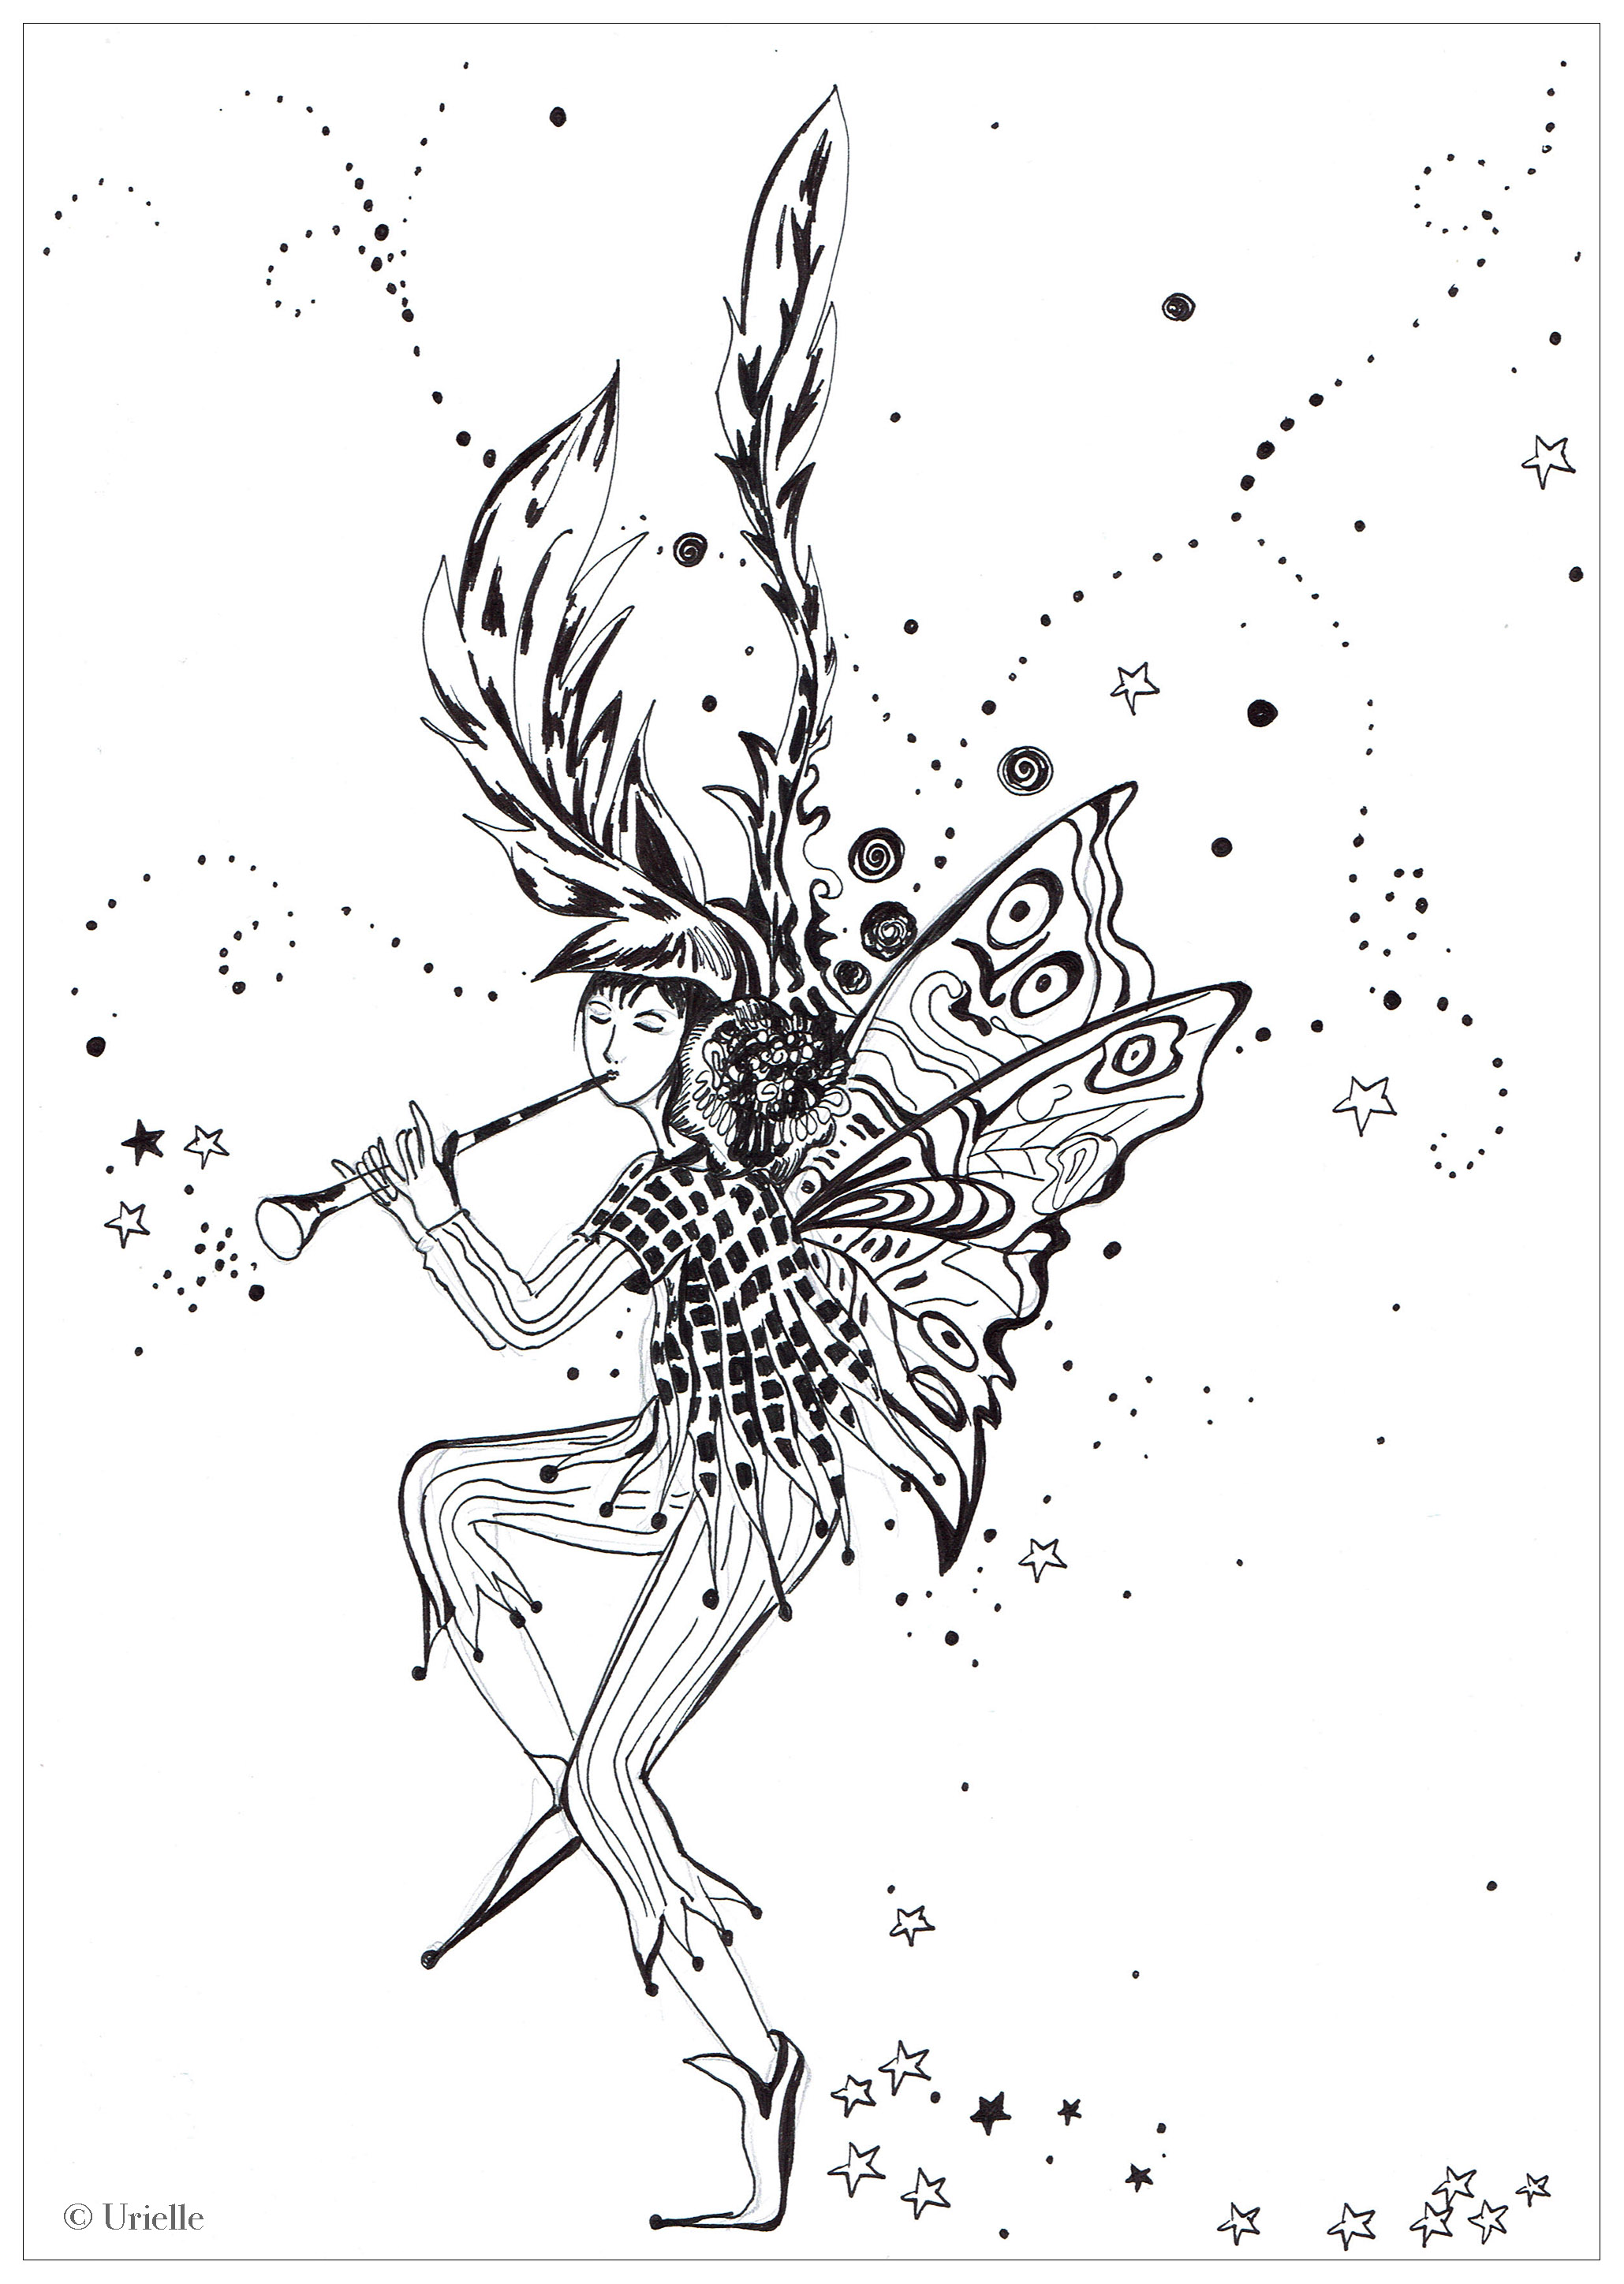 Announcing winter. Pretty fairy with butterfly wings, announcing the arrival of winter, Artist : Urielle